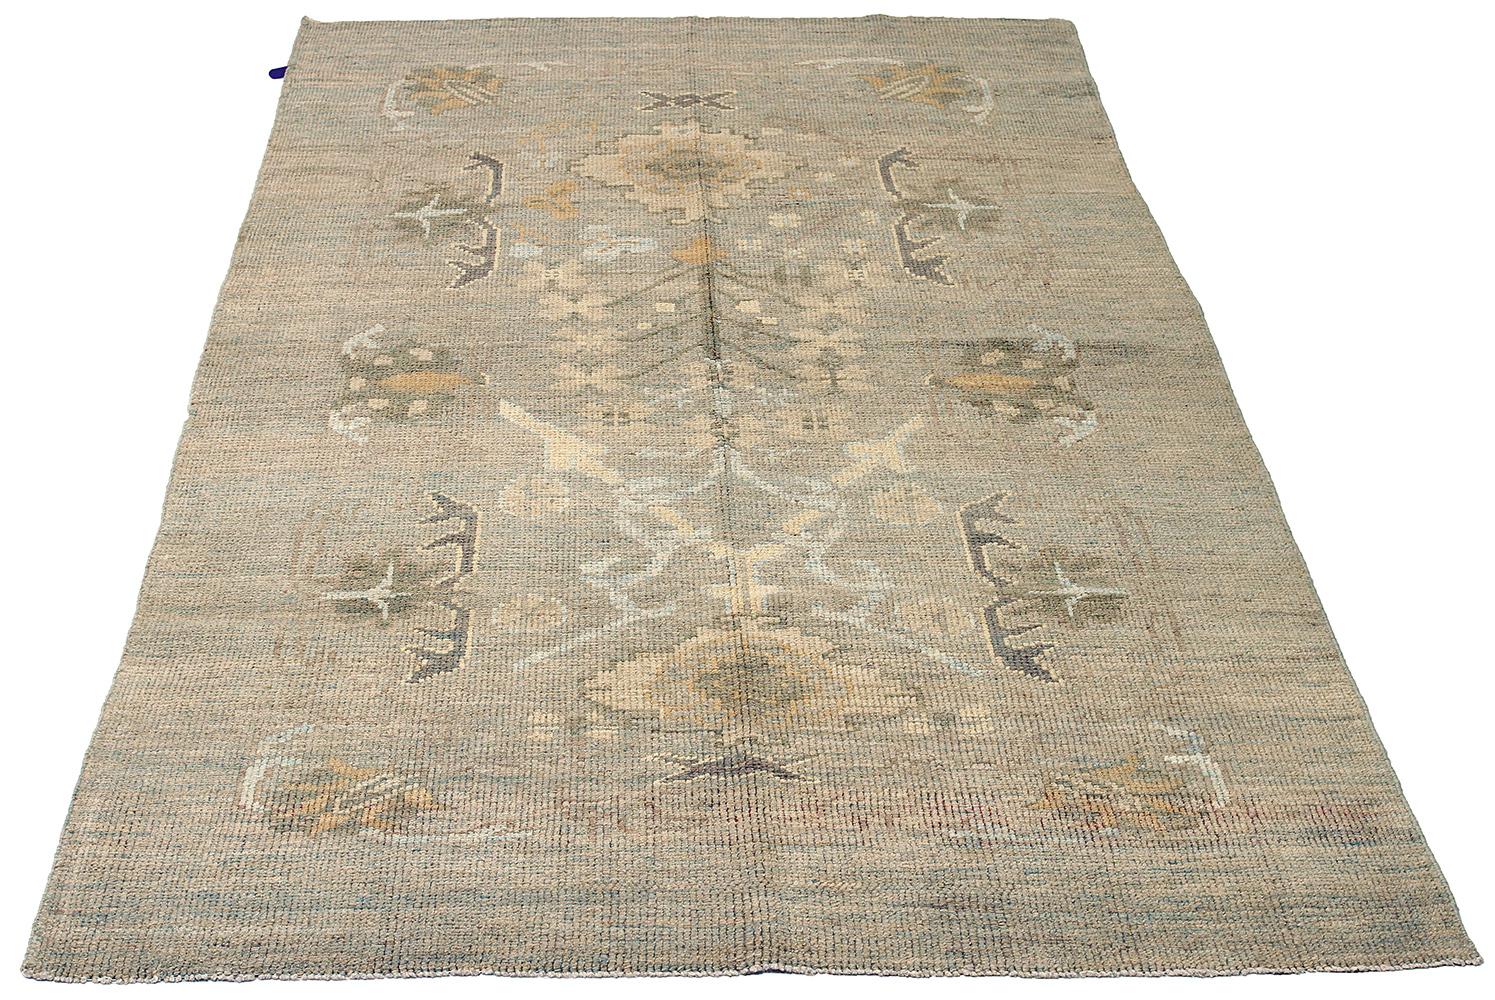 New Turkish rug made of handwoven sheep’s wool of the finest quality. It’s colored with organic vegetable dyes that are certified safe for humans and pets alike. It features gray and beige botanical details associated with Oushak weaving from